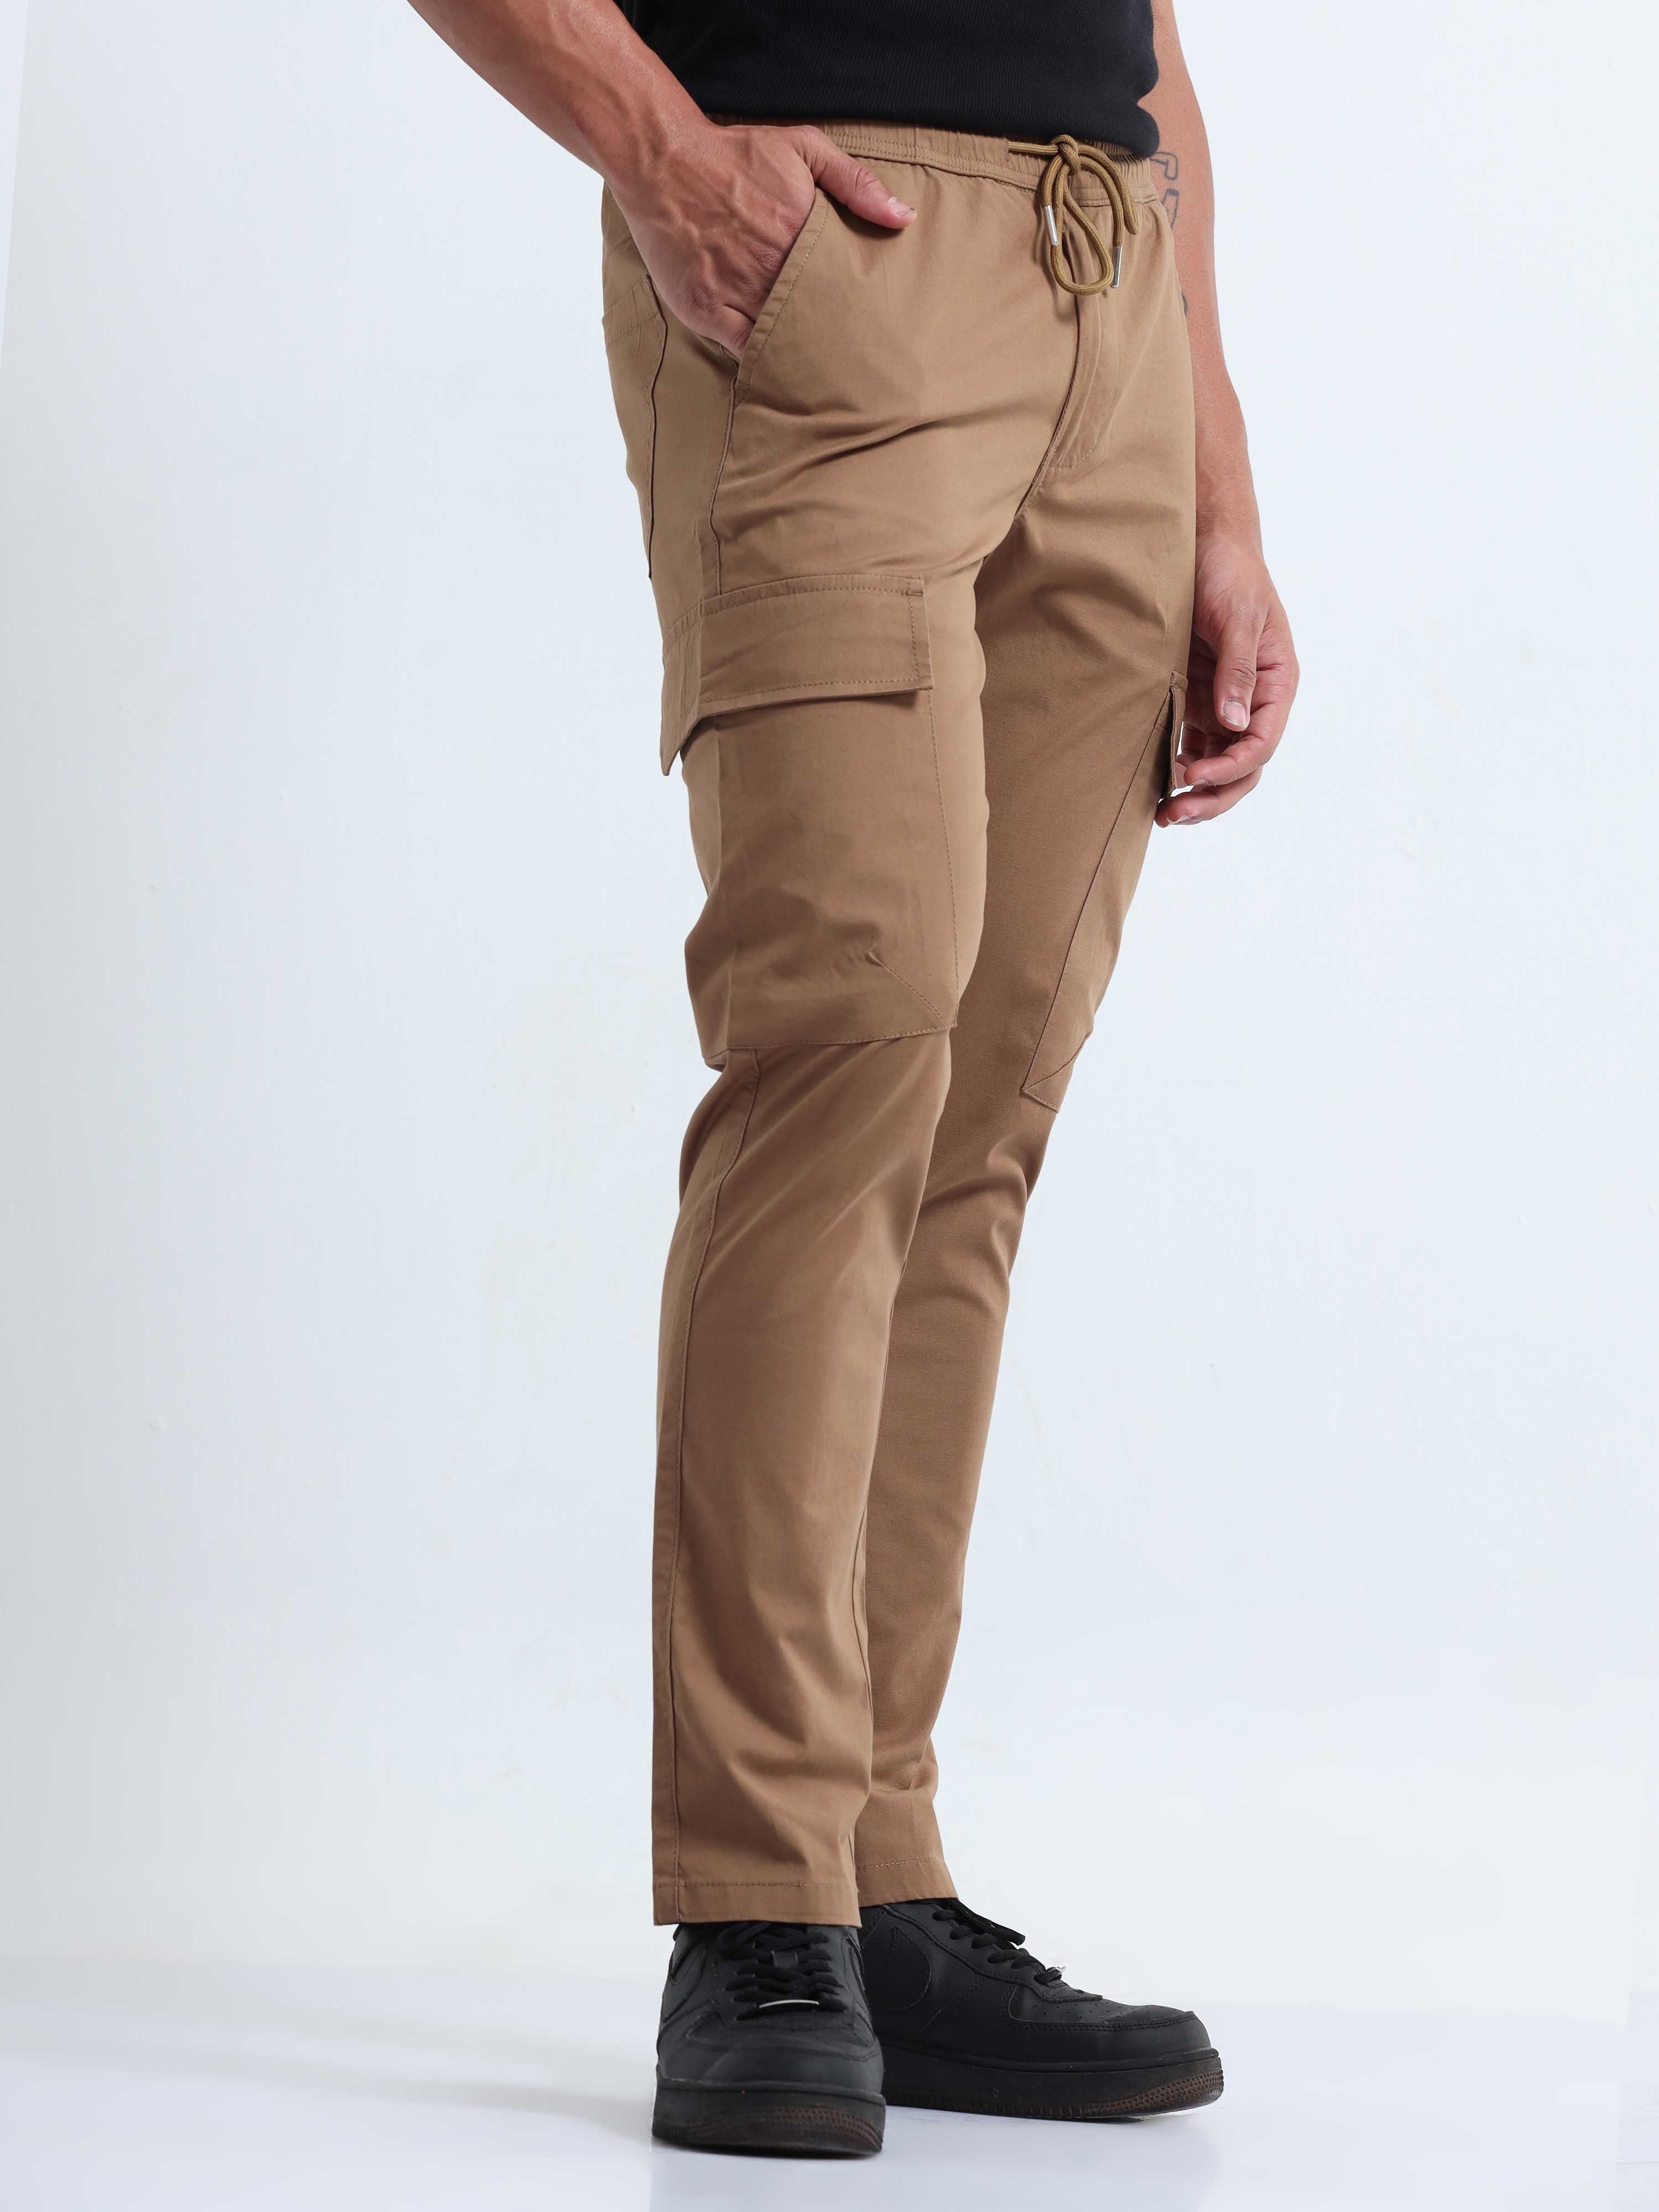 RT No. 10047 STRAP CARGO PANTS | Chinese streetwear, Cargo pants, Unique  clothing style